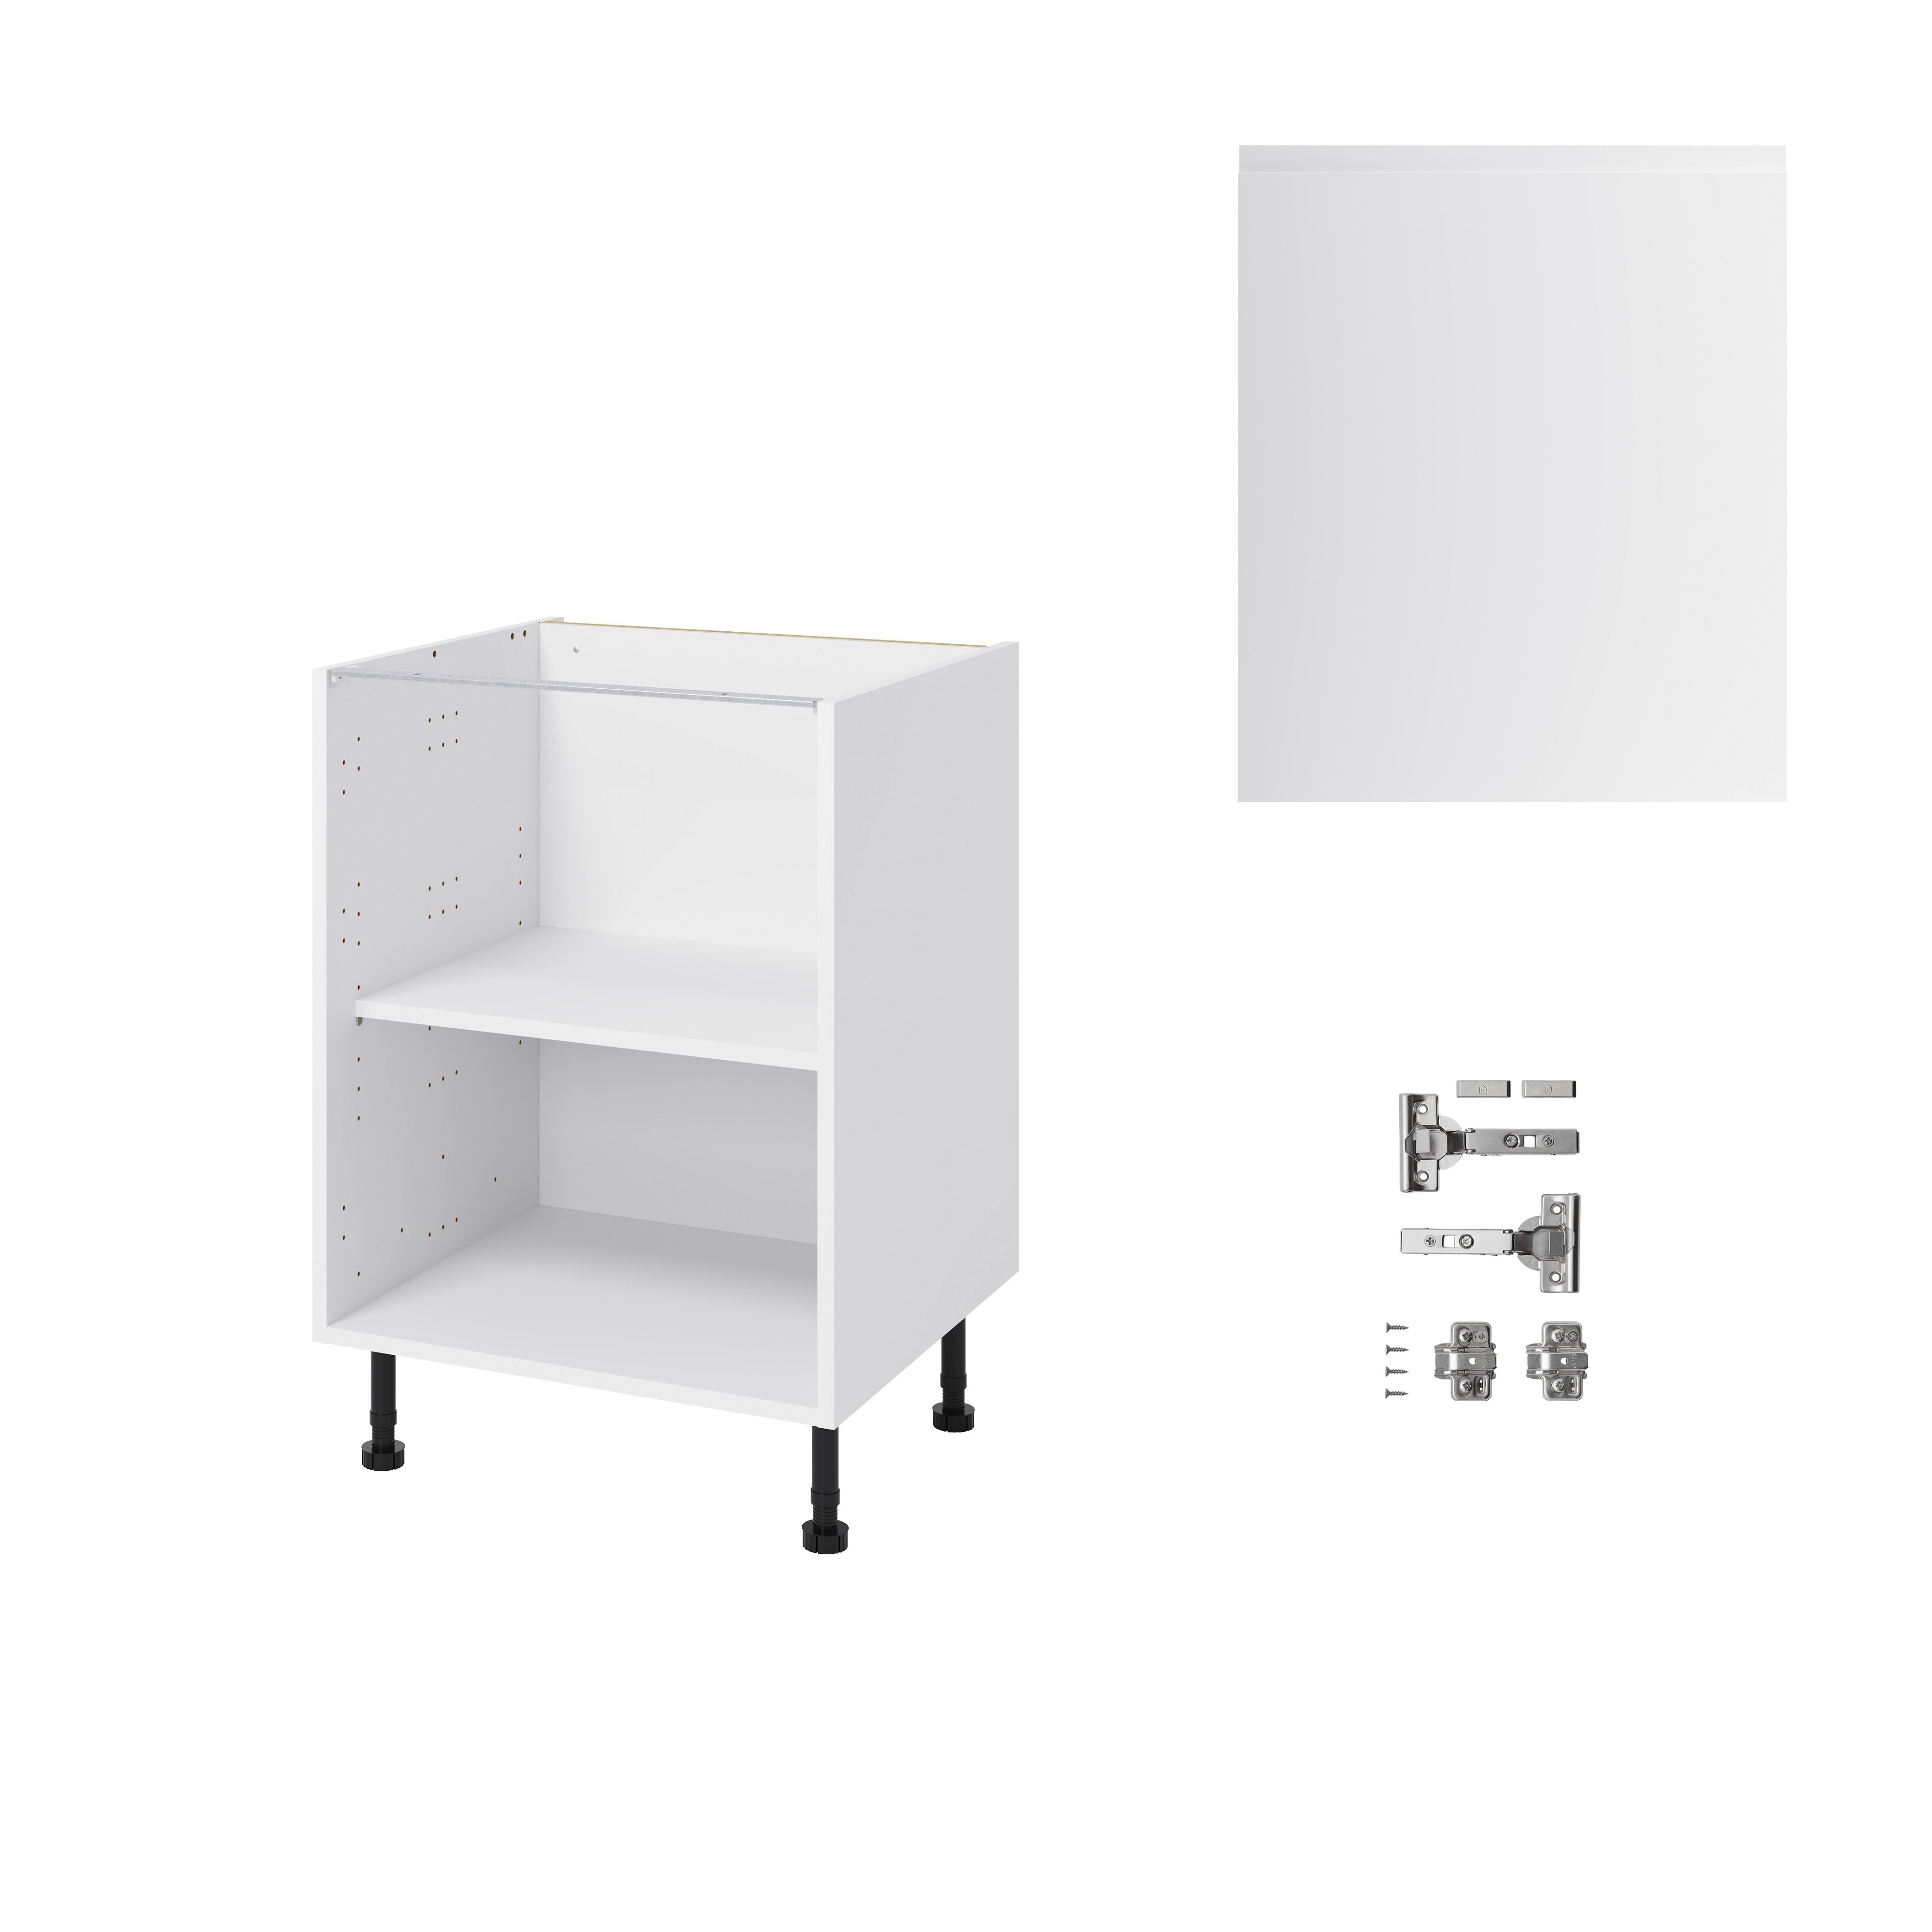 GoodHome Garcinia Gloss light grey integrated handle Base Kitchen cabinet (W)600mm (H)720mm